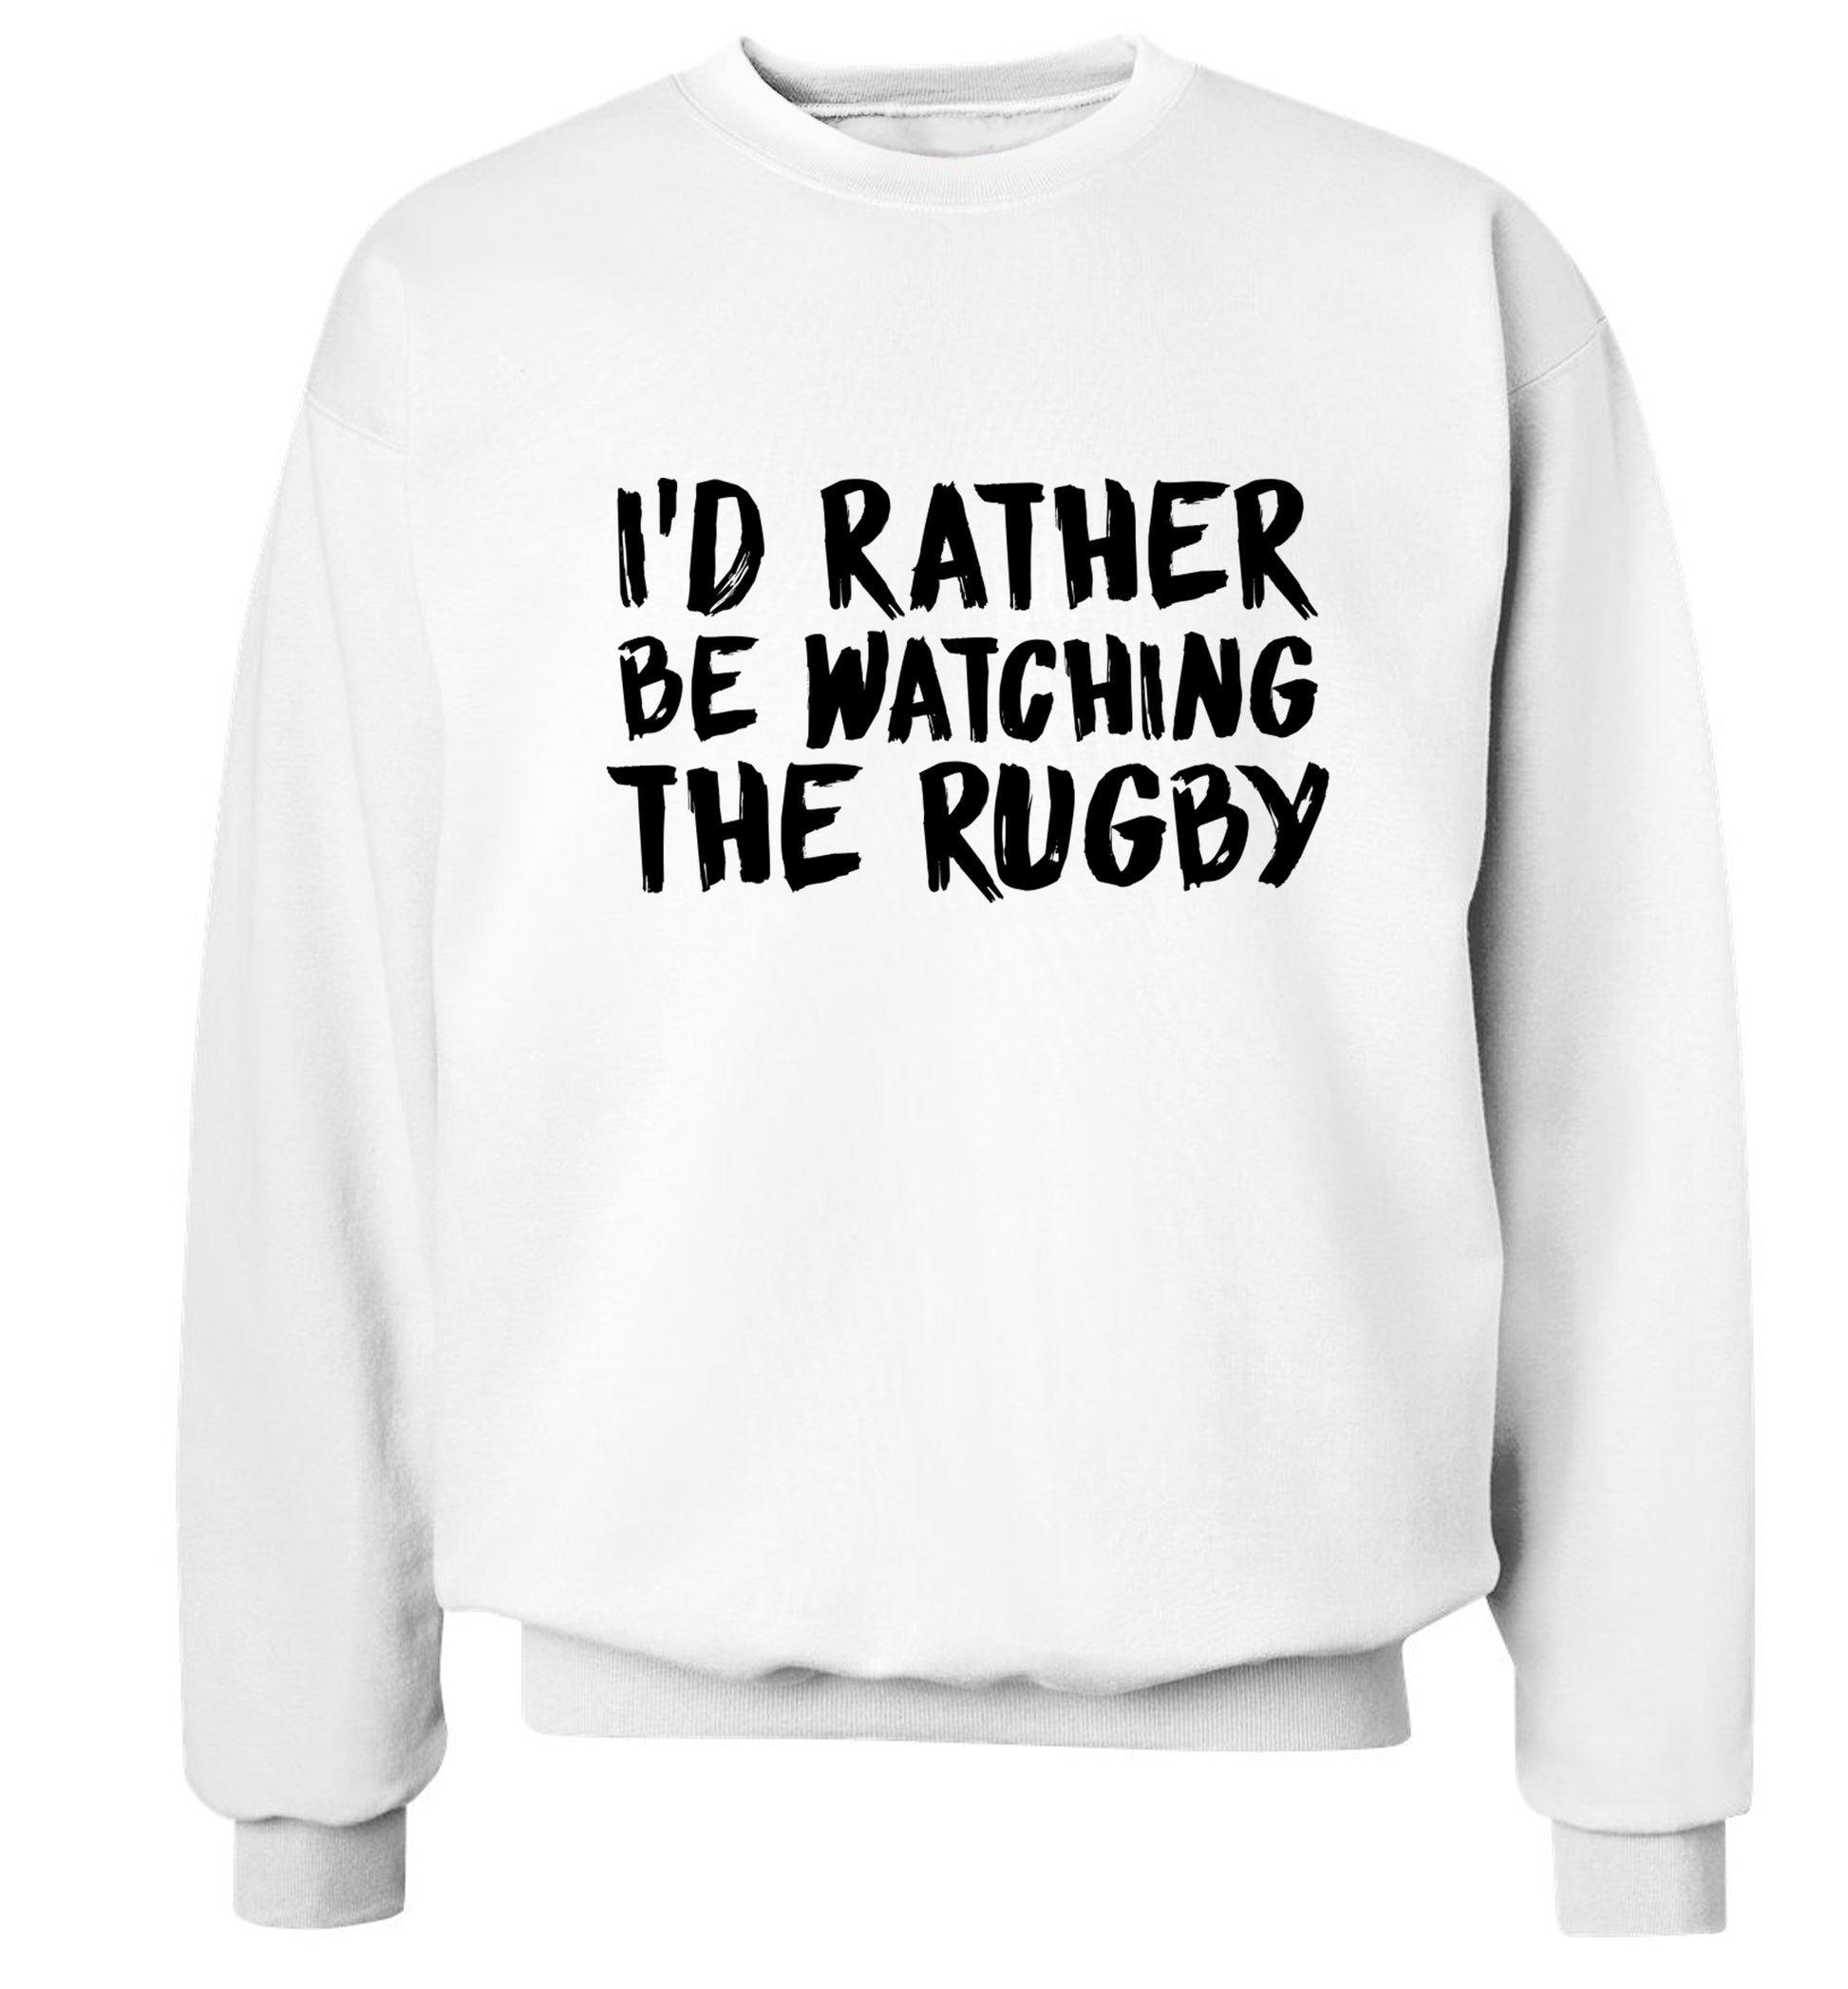 I'd rather be watching the rugby Adult's unisex white Sweater 2XL